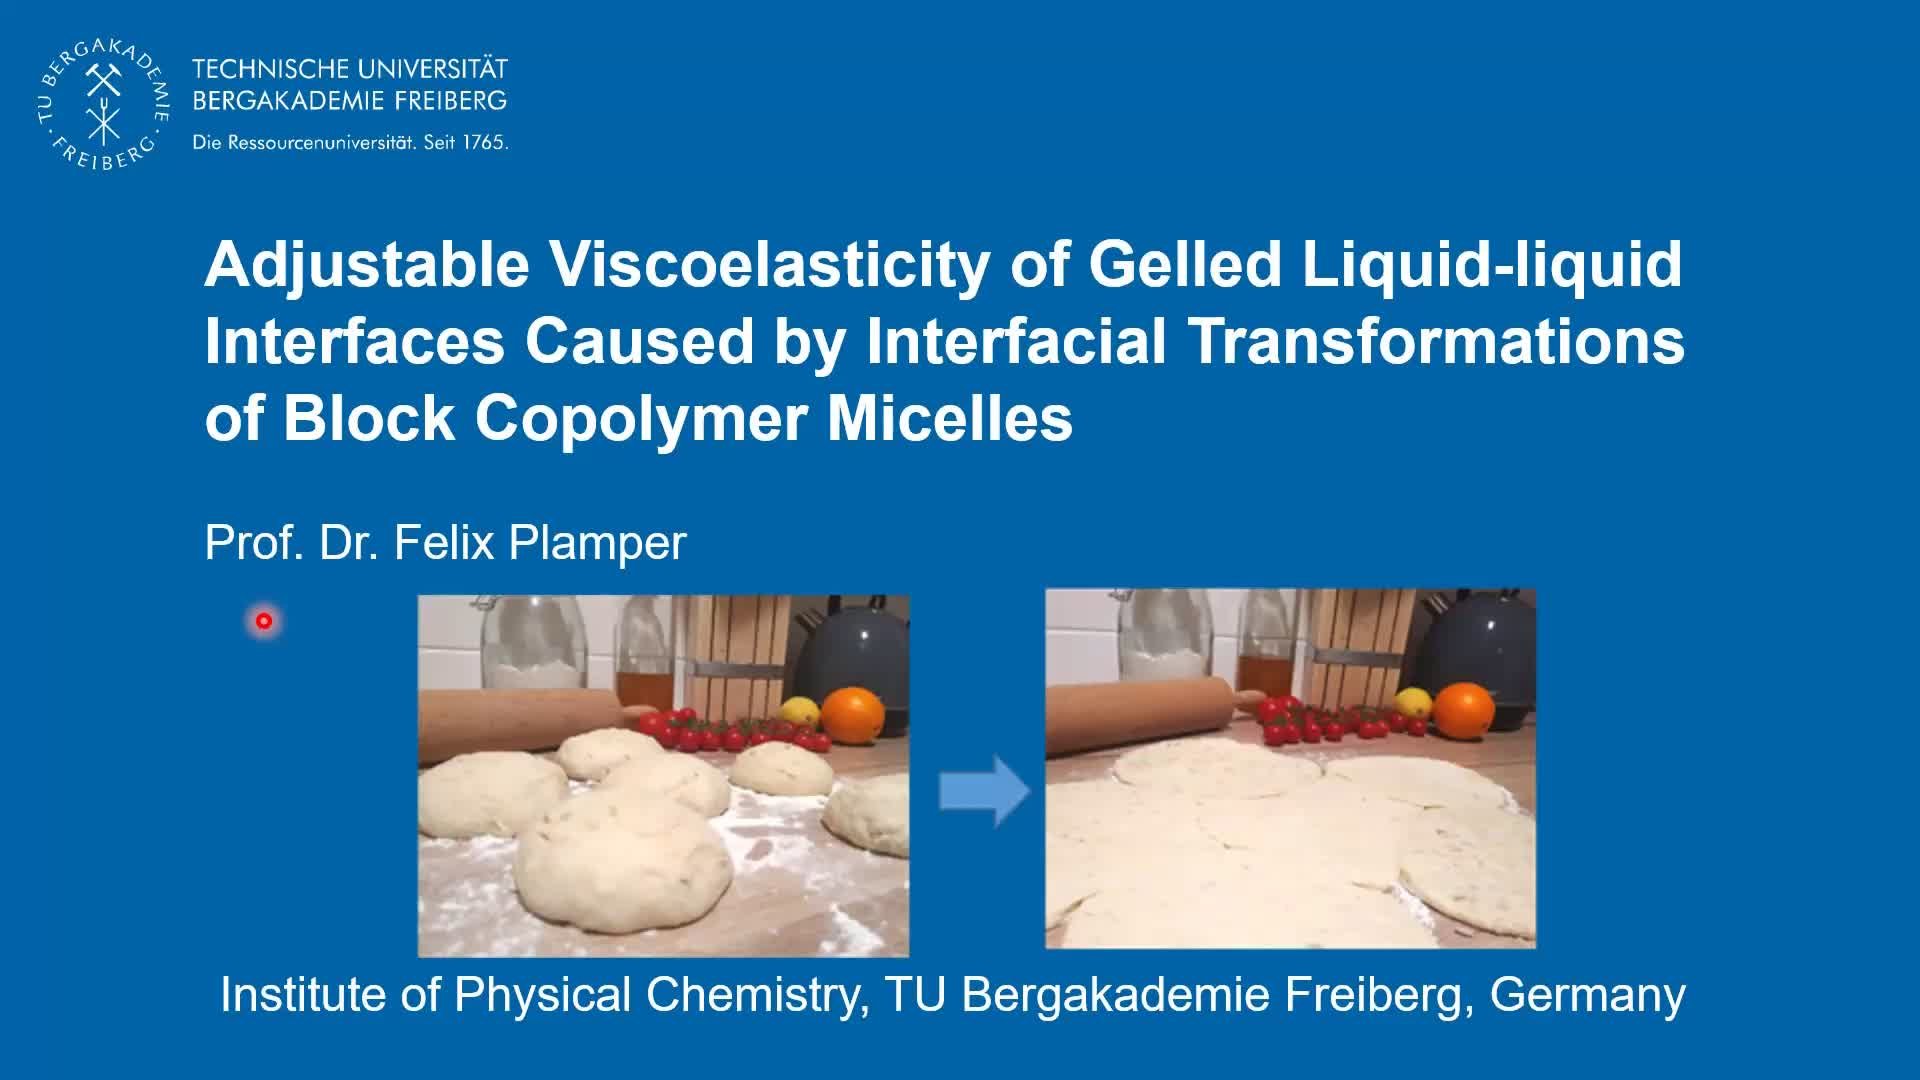 Interfacial Transformations of Adsorbed Micelles (pizza preparation)